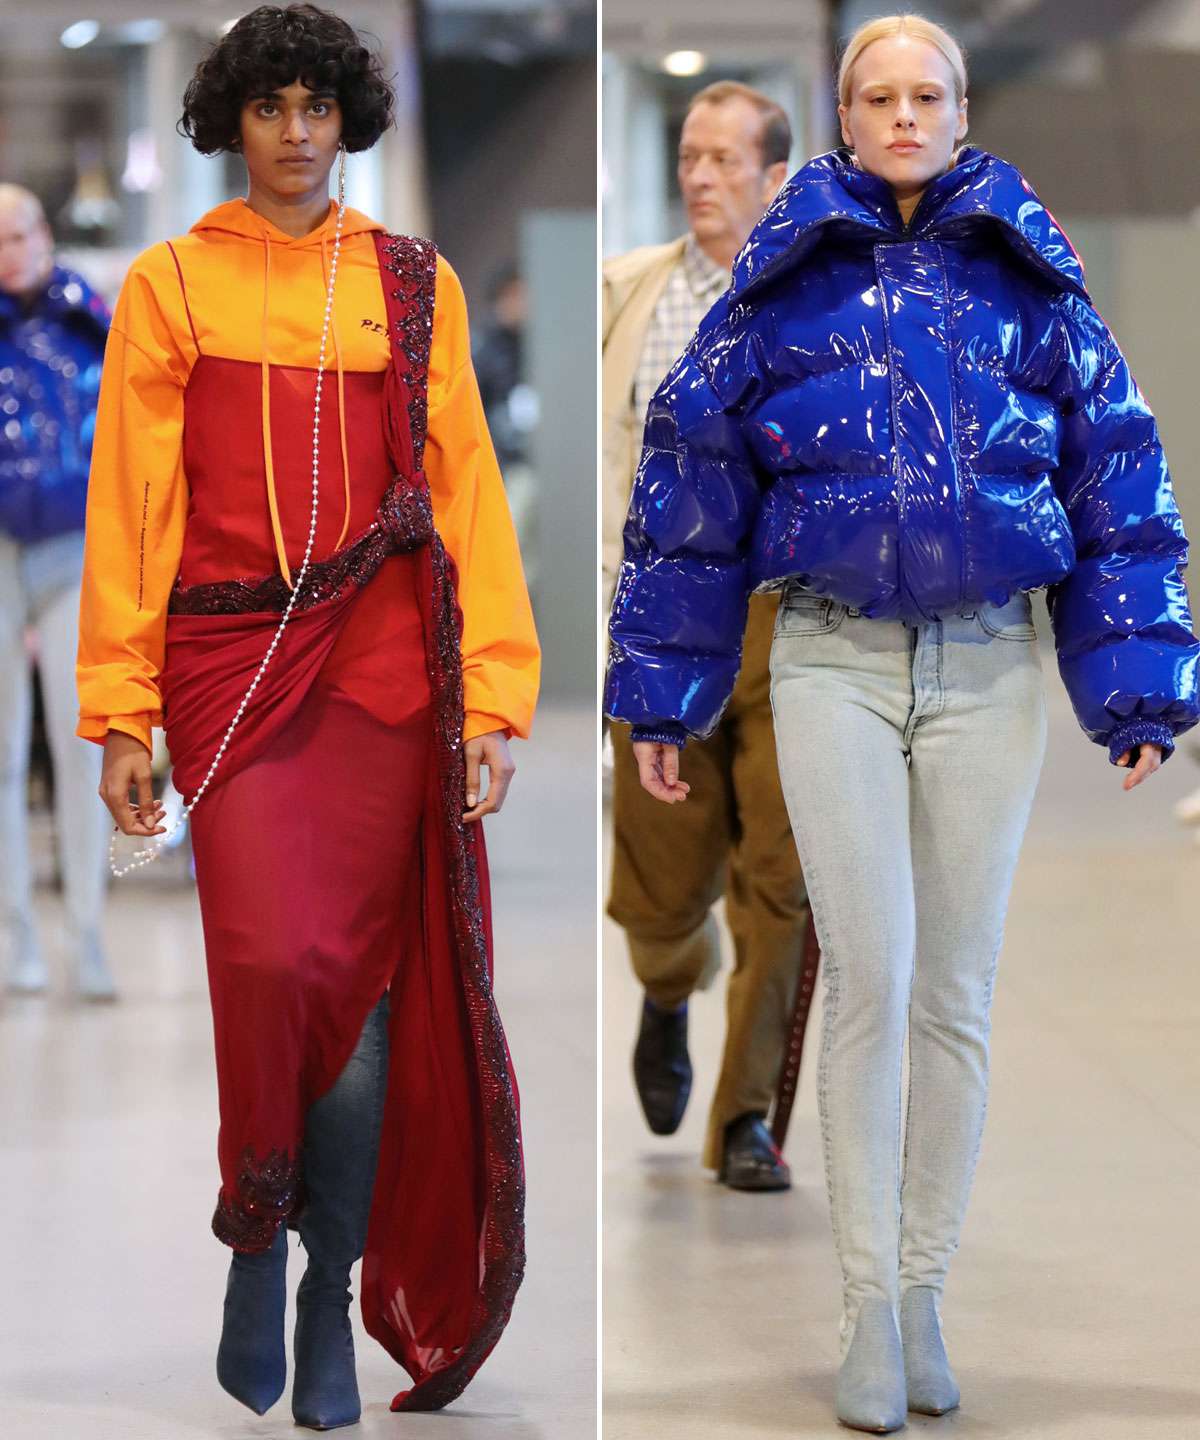 The On-Trend Vetements Girls